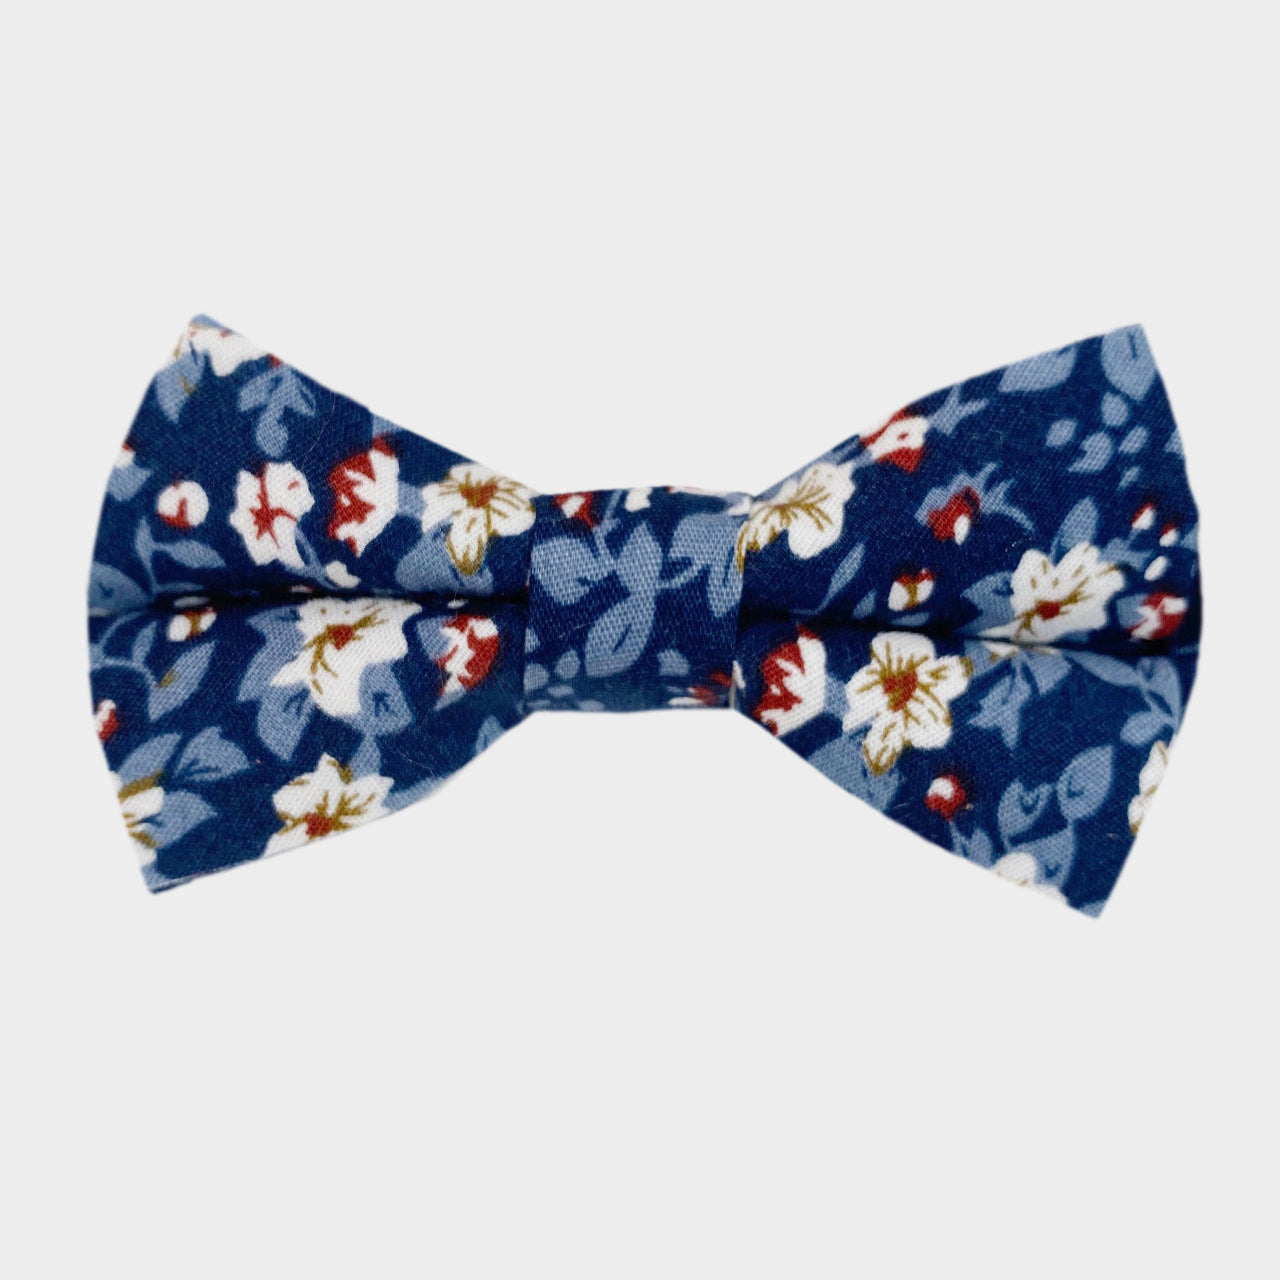 ANDY || SMALL PET BOW TIE - Pet Bow Tie